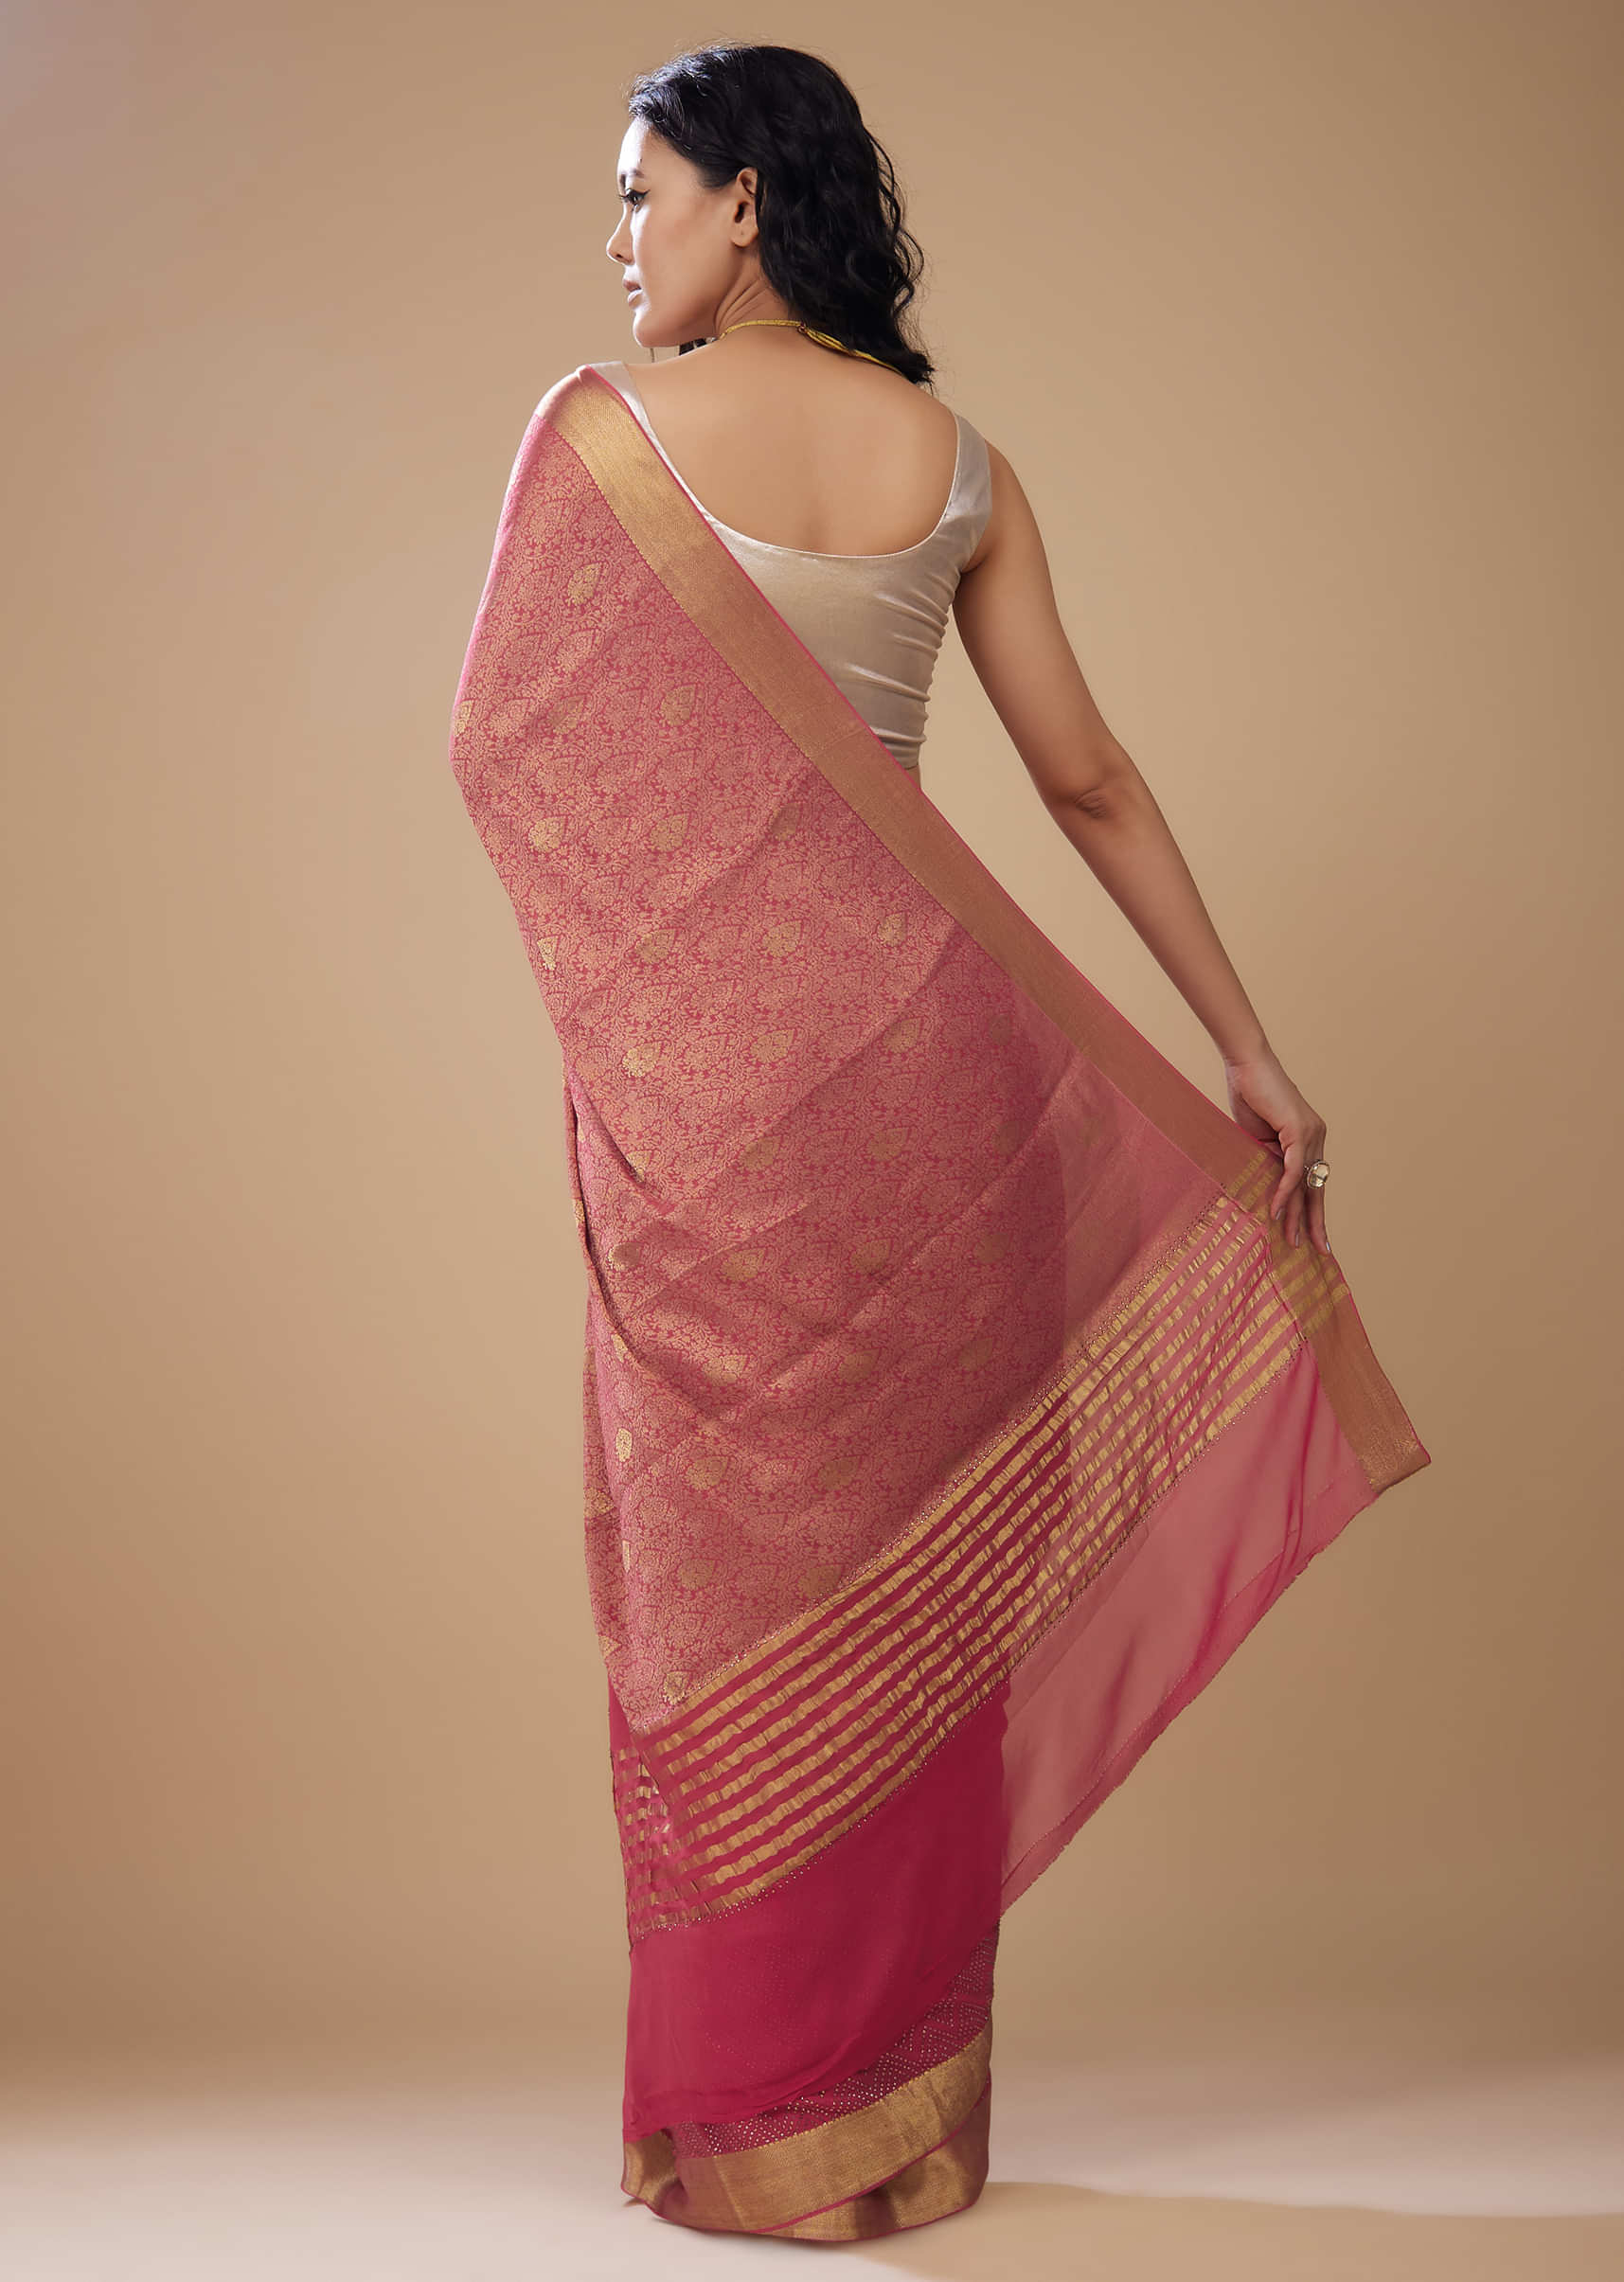 Rouge Pink Embroidered Chiffon Saree